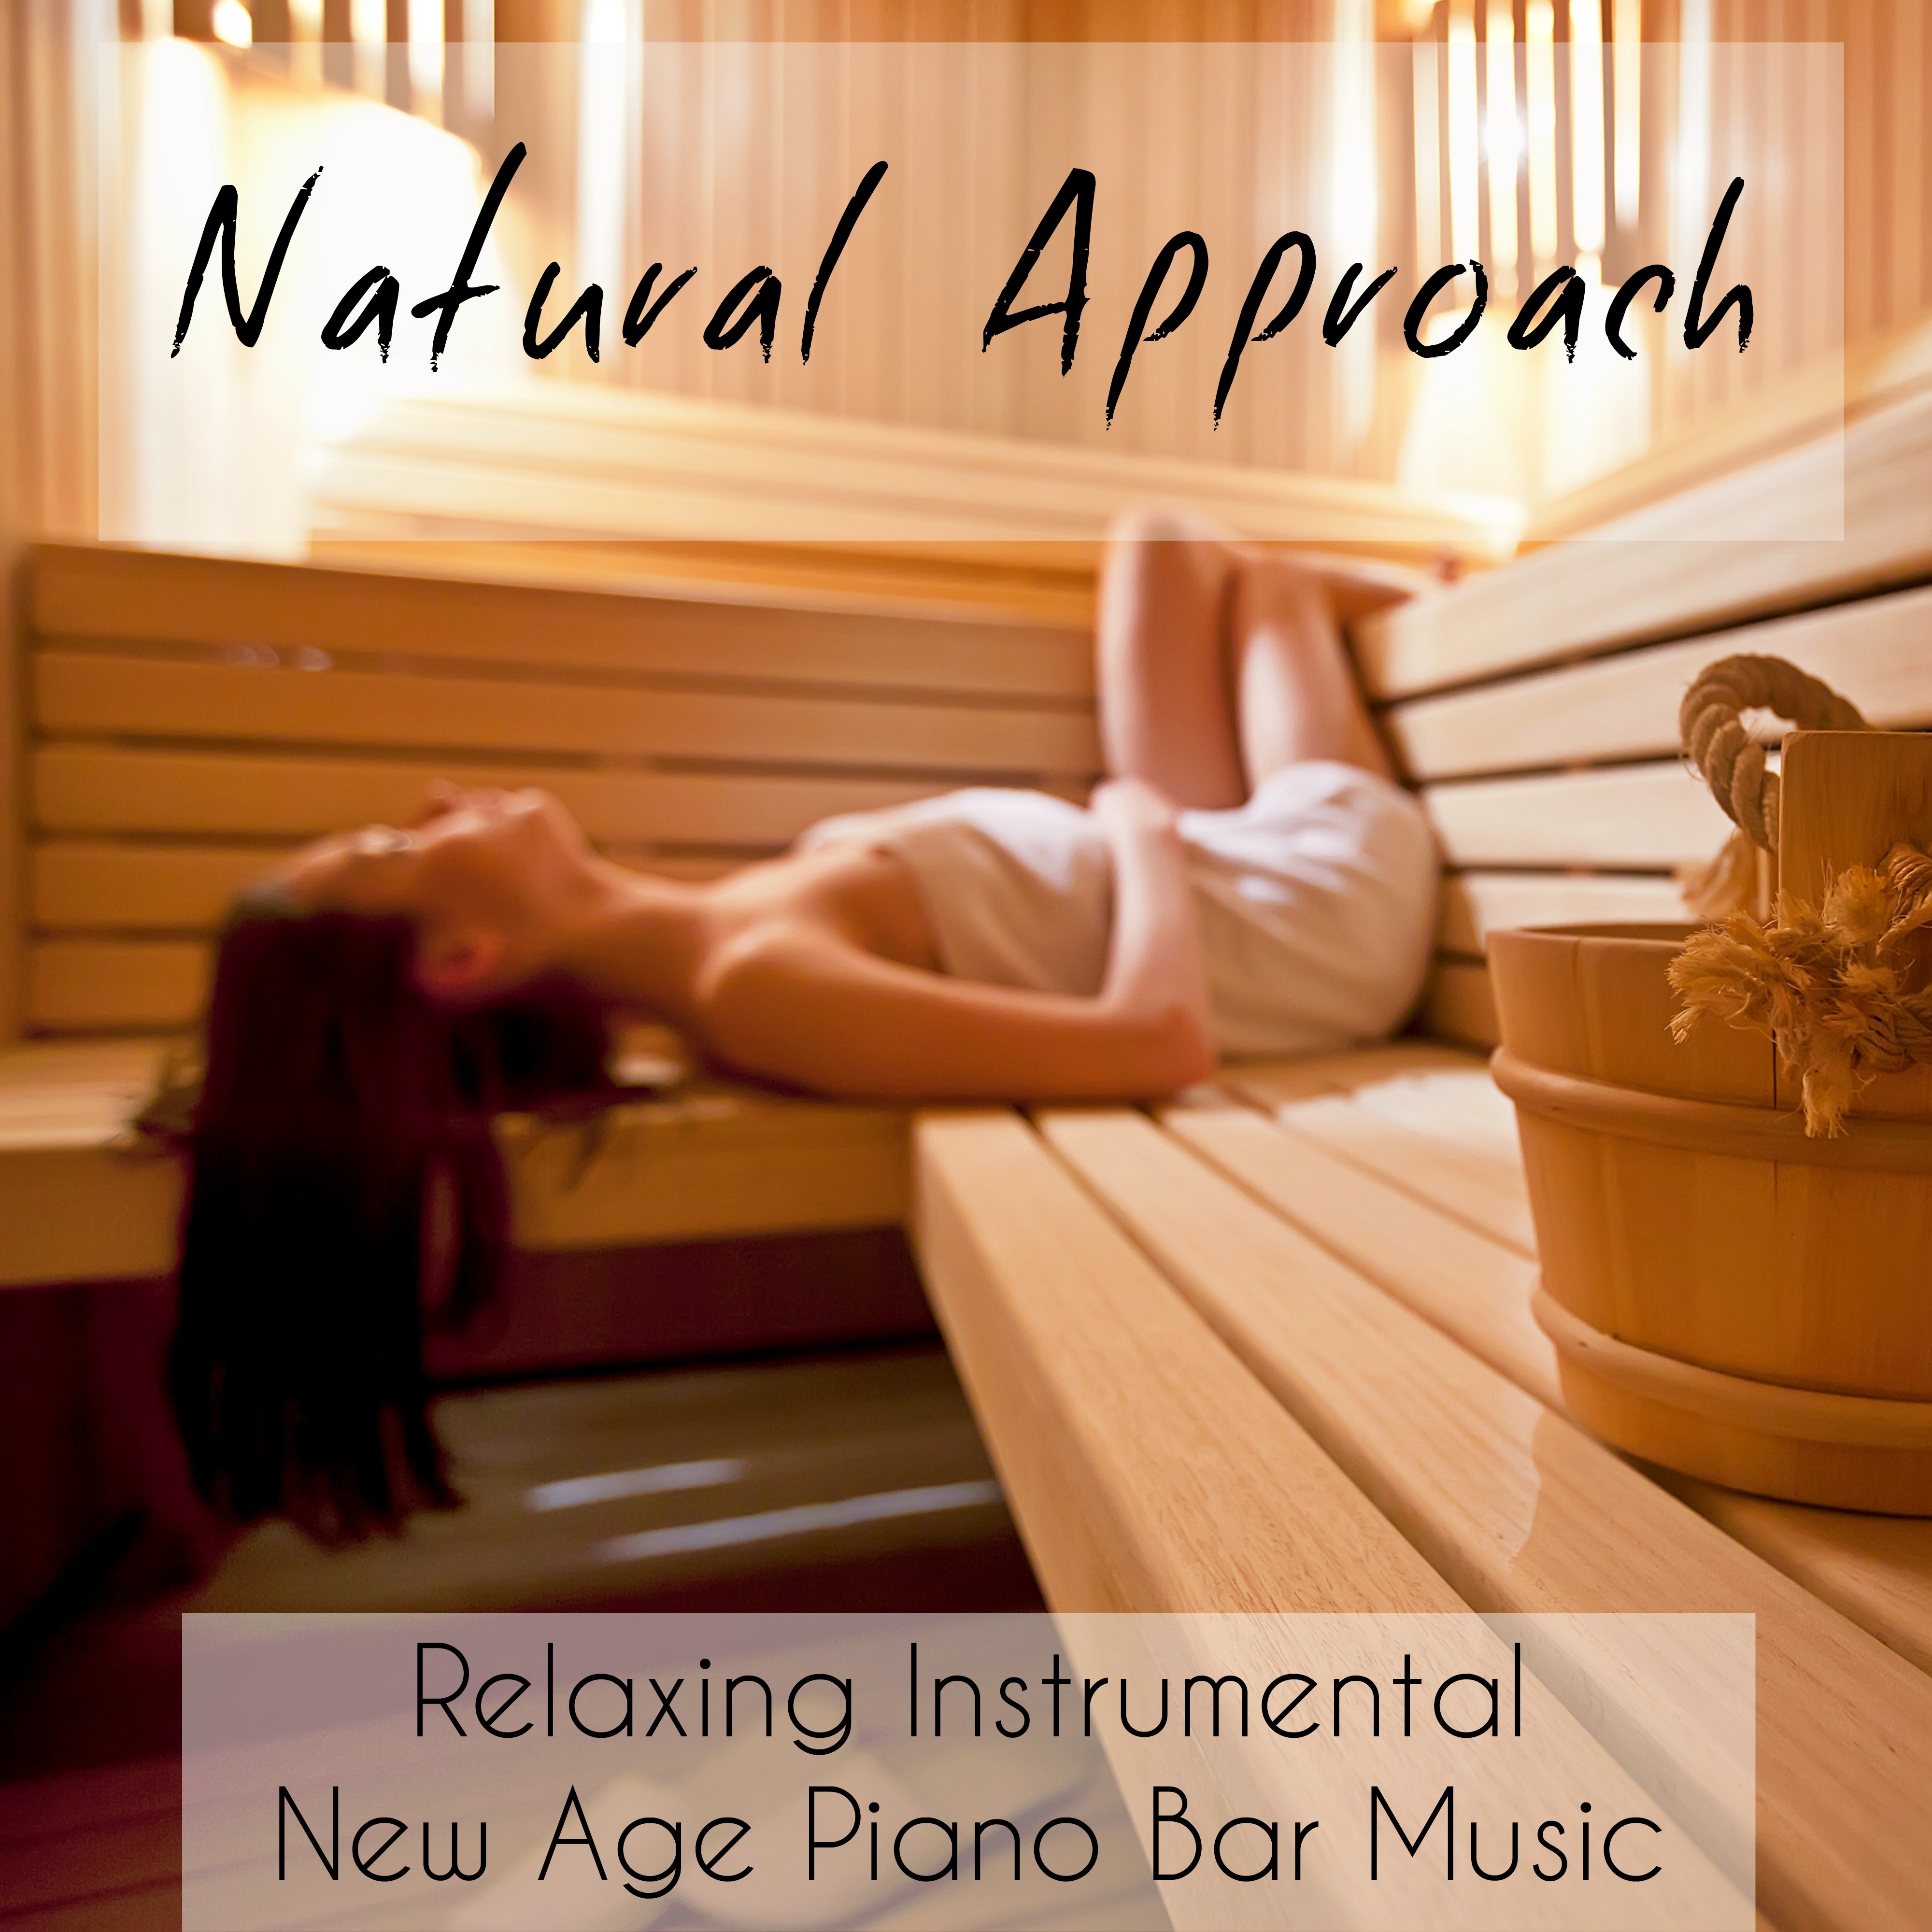 Natural Approach - Relaxing Instrumental New Age Piano Bar Music for Daily Meditation and Relax Spa